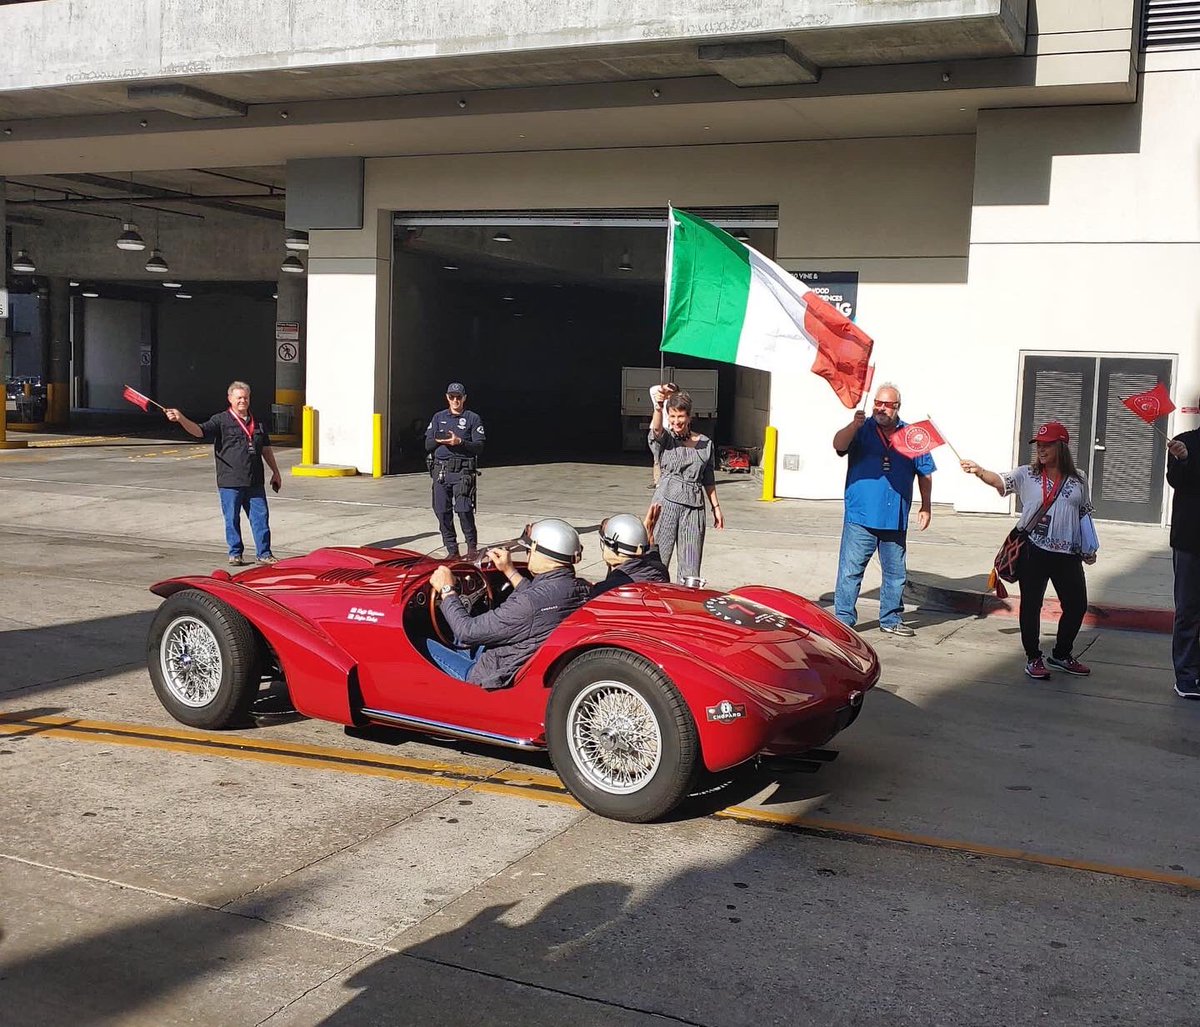 It was a such a pleasure for us to kick off the annual vintage motorsports event @CaliforniaMille on Monday! Modeled after the Mille Miglia race in 🇮🇹, this is the first time in its history that the event departs from Los Angeles. We waved the Italian flag high for their send-off